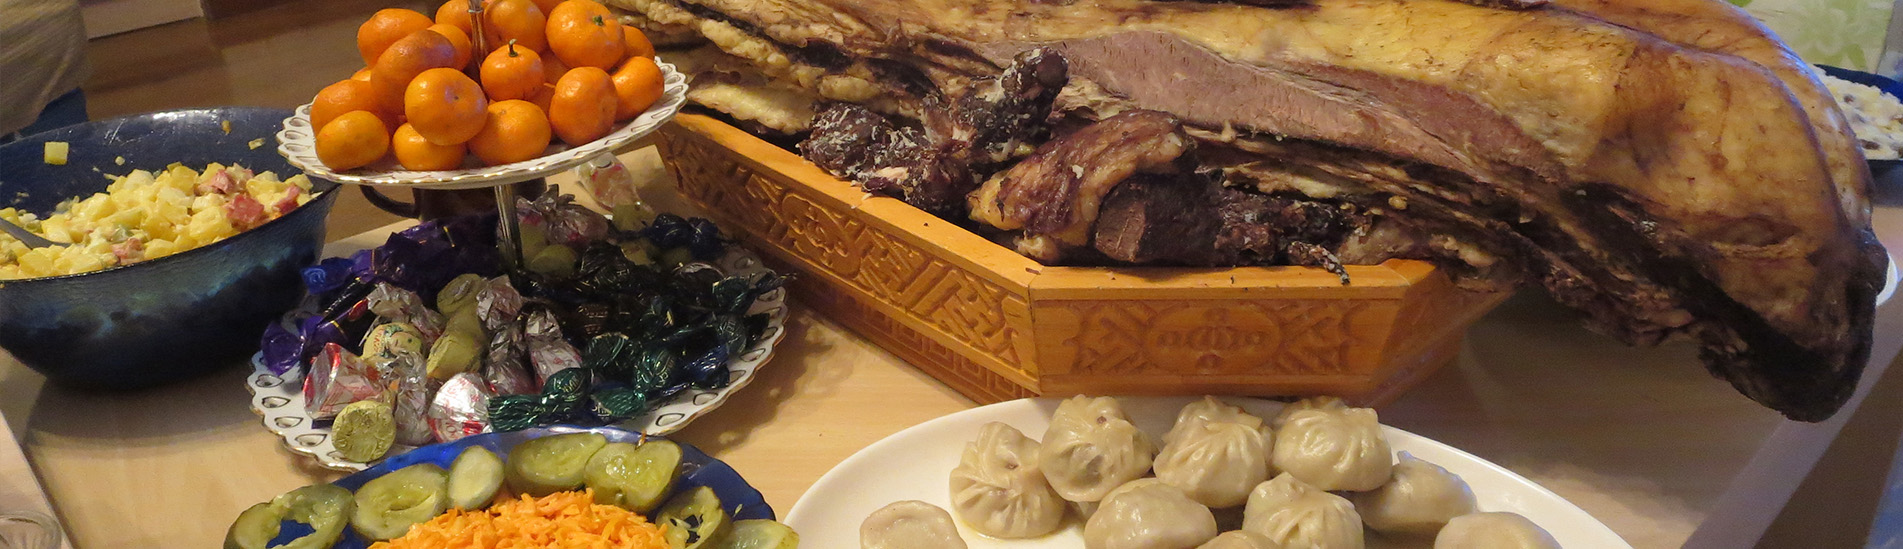 Mongolian traditional food and beverage